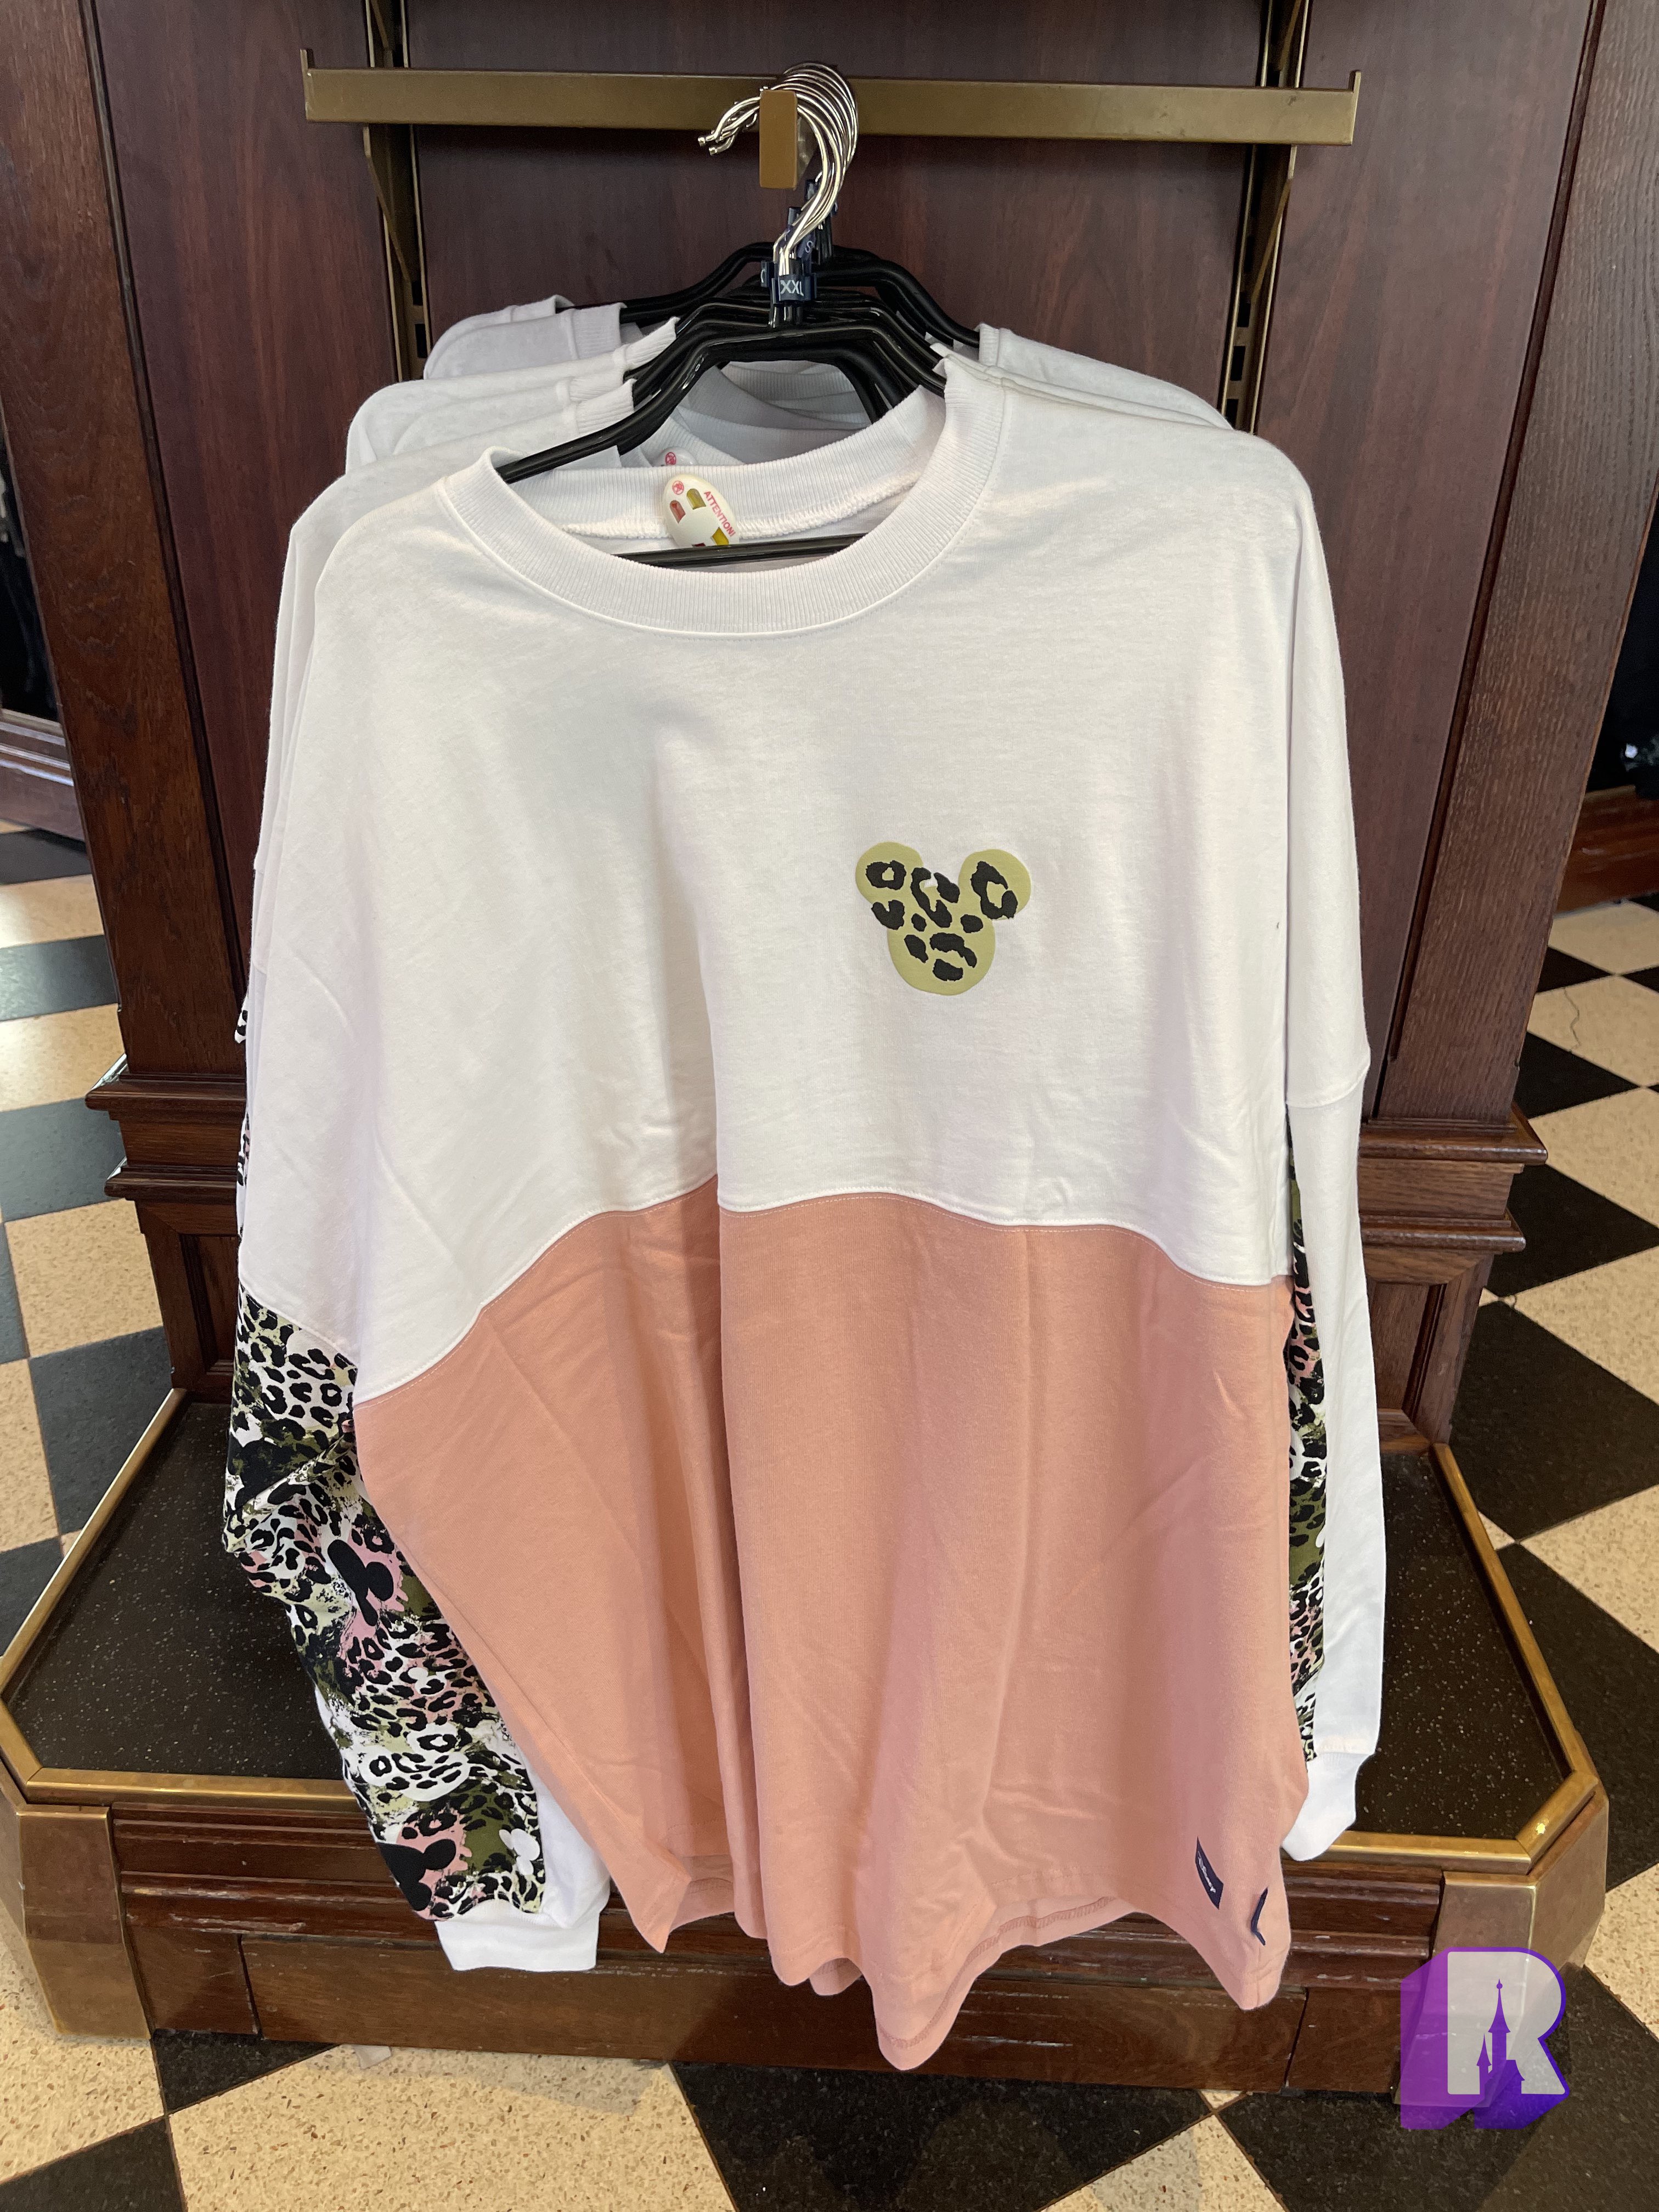 DLP Report on X: 🛍 The Mighty Ducks Spirit Jersey (€90), at The